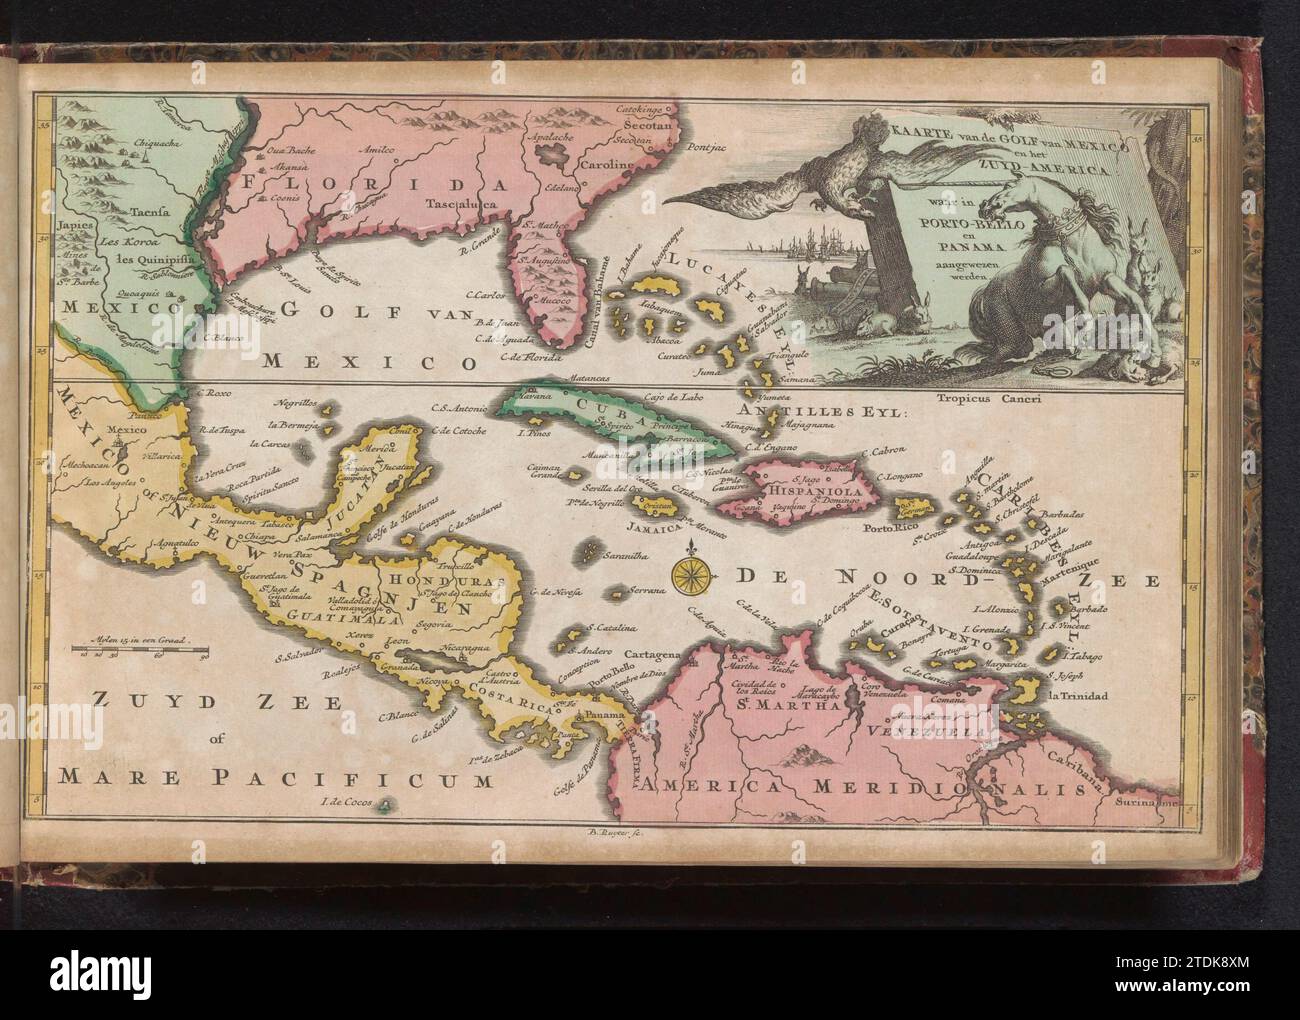 https://c8.alamy.com/comp/2TDK8XM/map-of-the-gulf-of-mexico-balthasar-ruyter-1735-map-of-the-countries-located-on-the-gulf-of-mexico-at-the-top-right-a-vignette-with-a-english-unicorn-that-broke-his-chain-and-holds-a-ram-under-a-hoof-an-eagle-in-the-air-hereby-also-some-rabbits-probably-in-connection-with-the-battlefield-of-the-spanish-succession-war-part-of-an-atlas-with-223-maps-of-countries-and-cities-and-war-scenes-in-europe-in-the-period-ca-1690-1735-print-maker-northern-netherlandspublisher-amsterdam-paper-etching-engraving-florida-mexico-south-america-central-america-panama-cuba-hispaniola-map-of-t-2TDK8XM.jpg